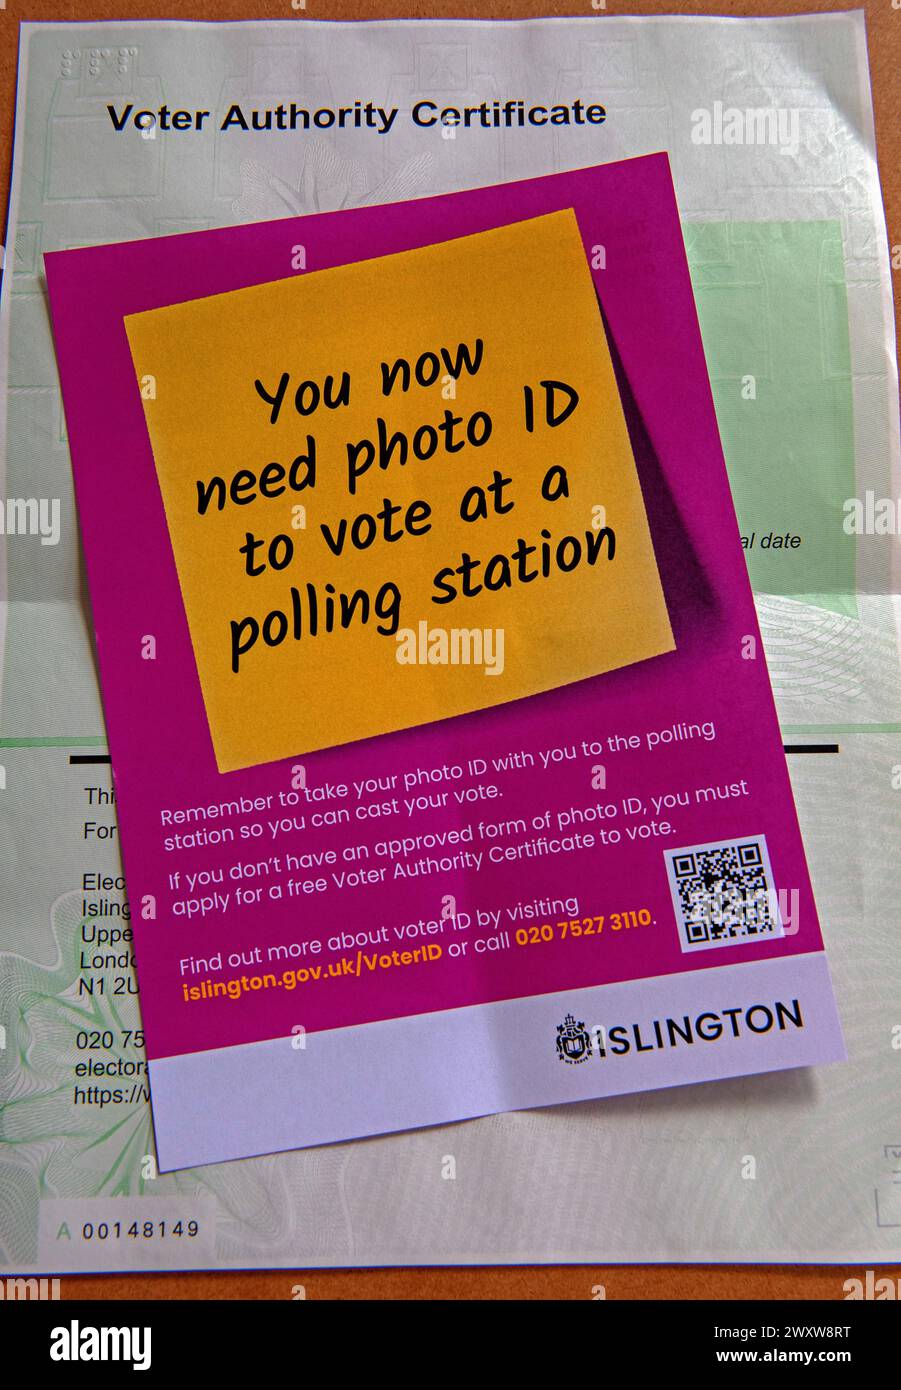 Voter Authority Certificate behind leaflet reminding voters they need photo ID to vote at a polling station Stock Photo